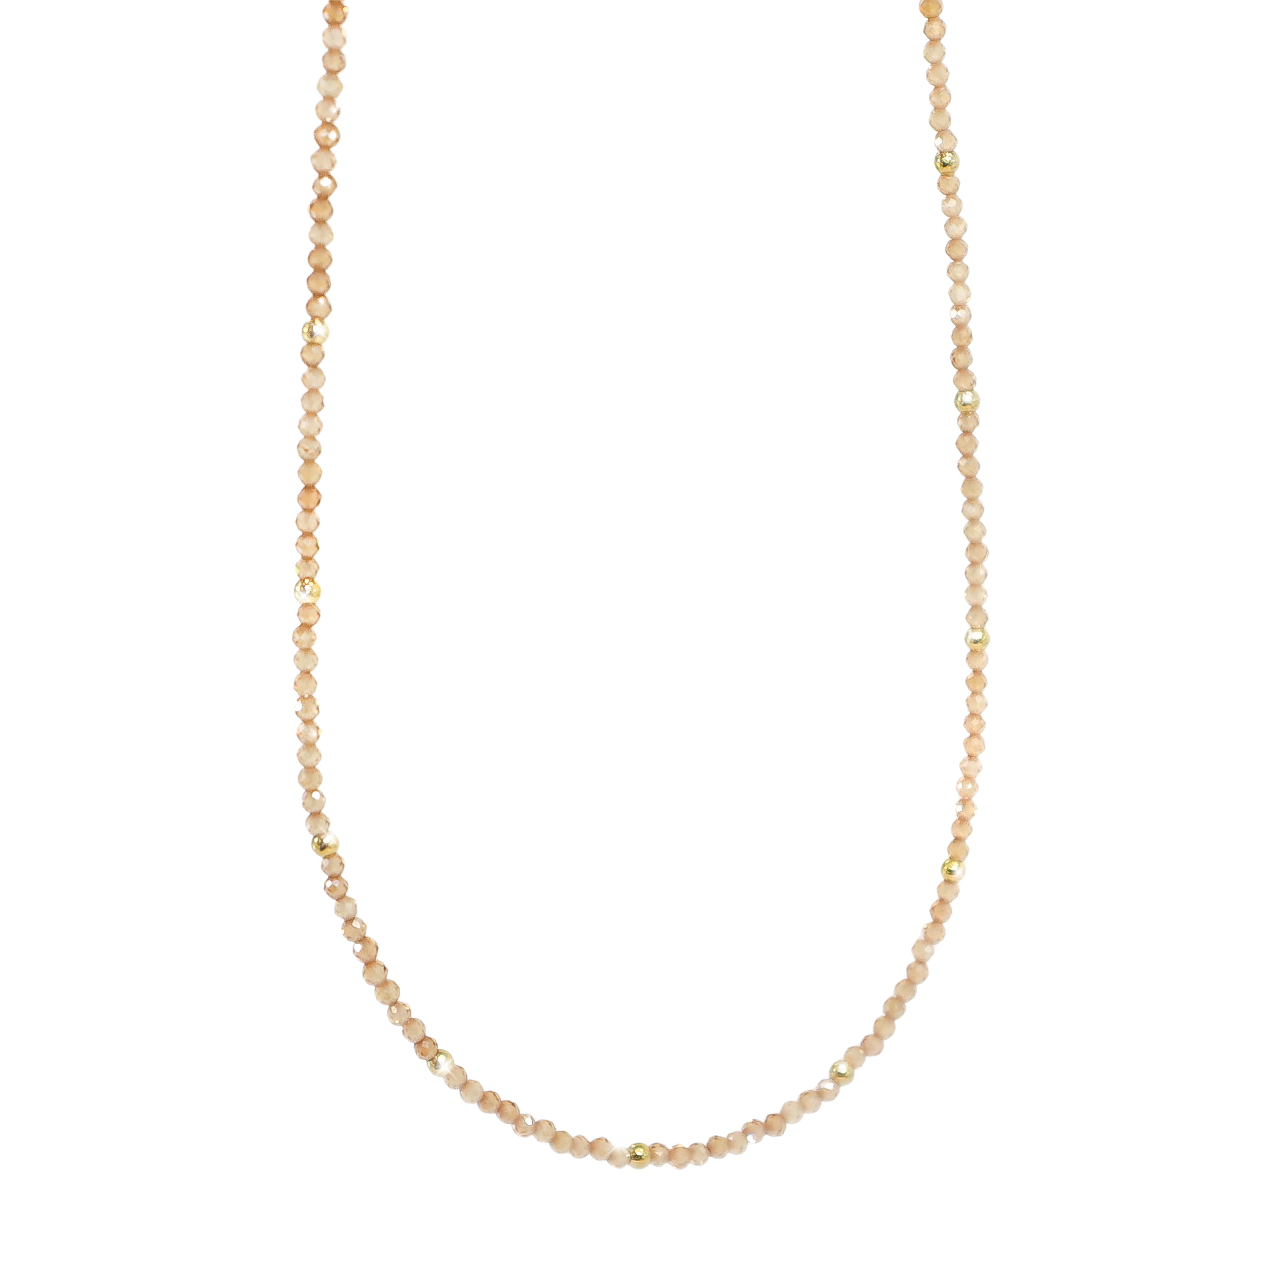 Tan & Gold Crystal Necklace